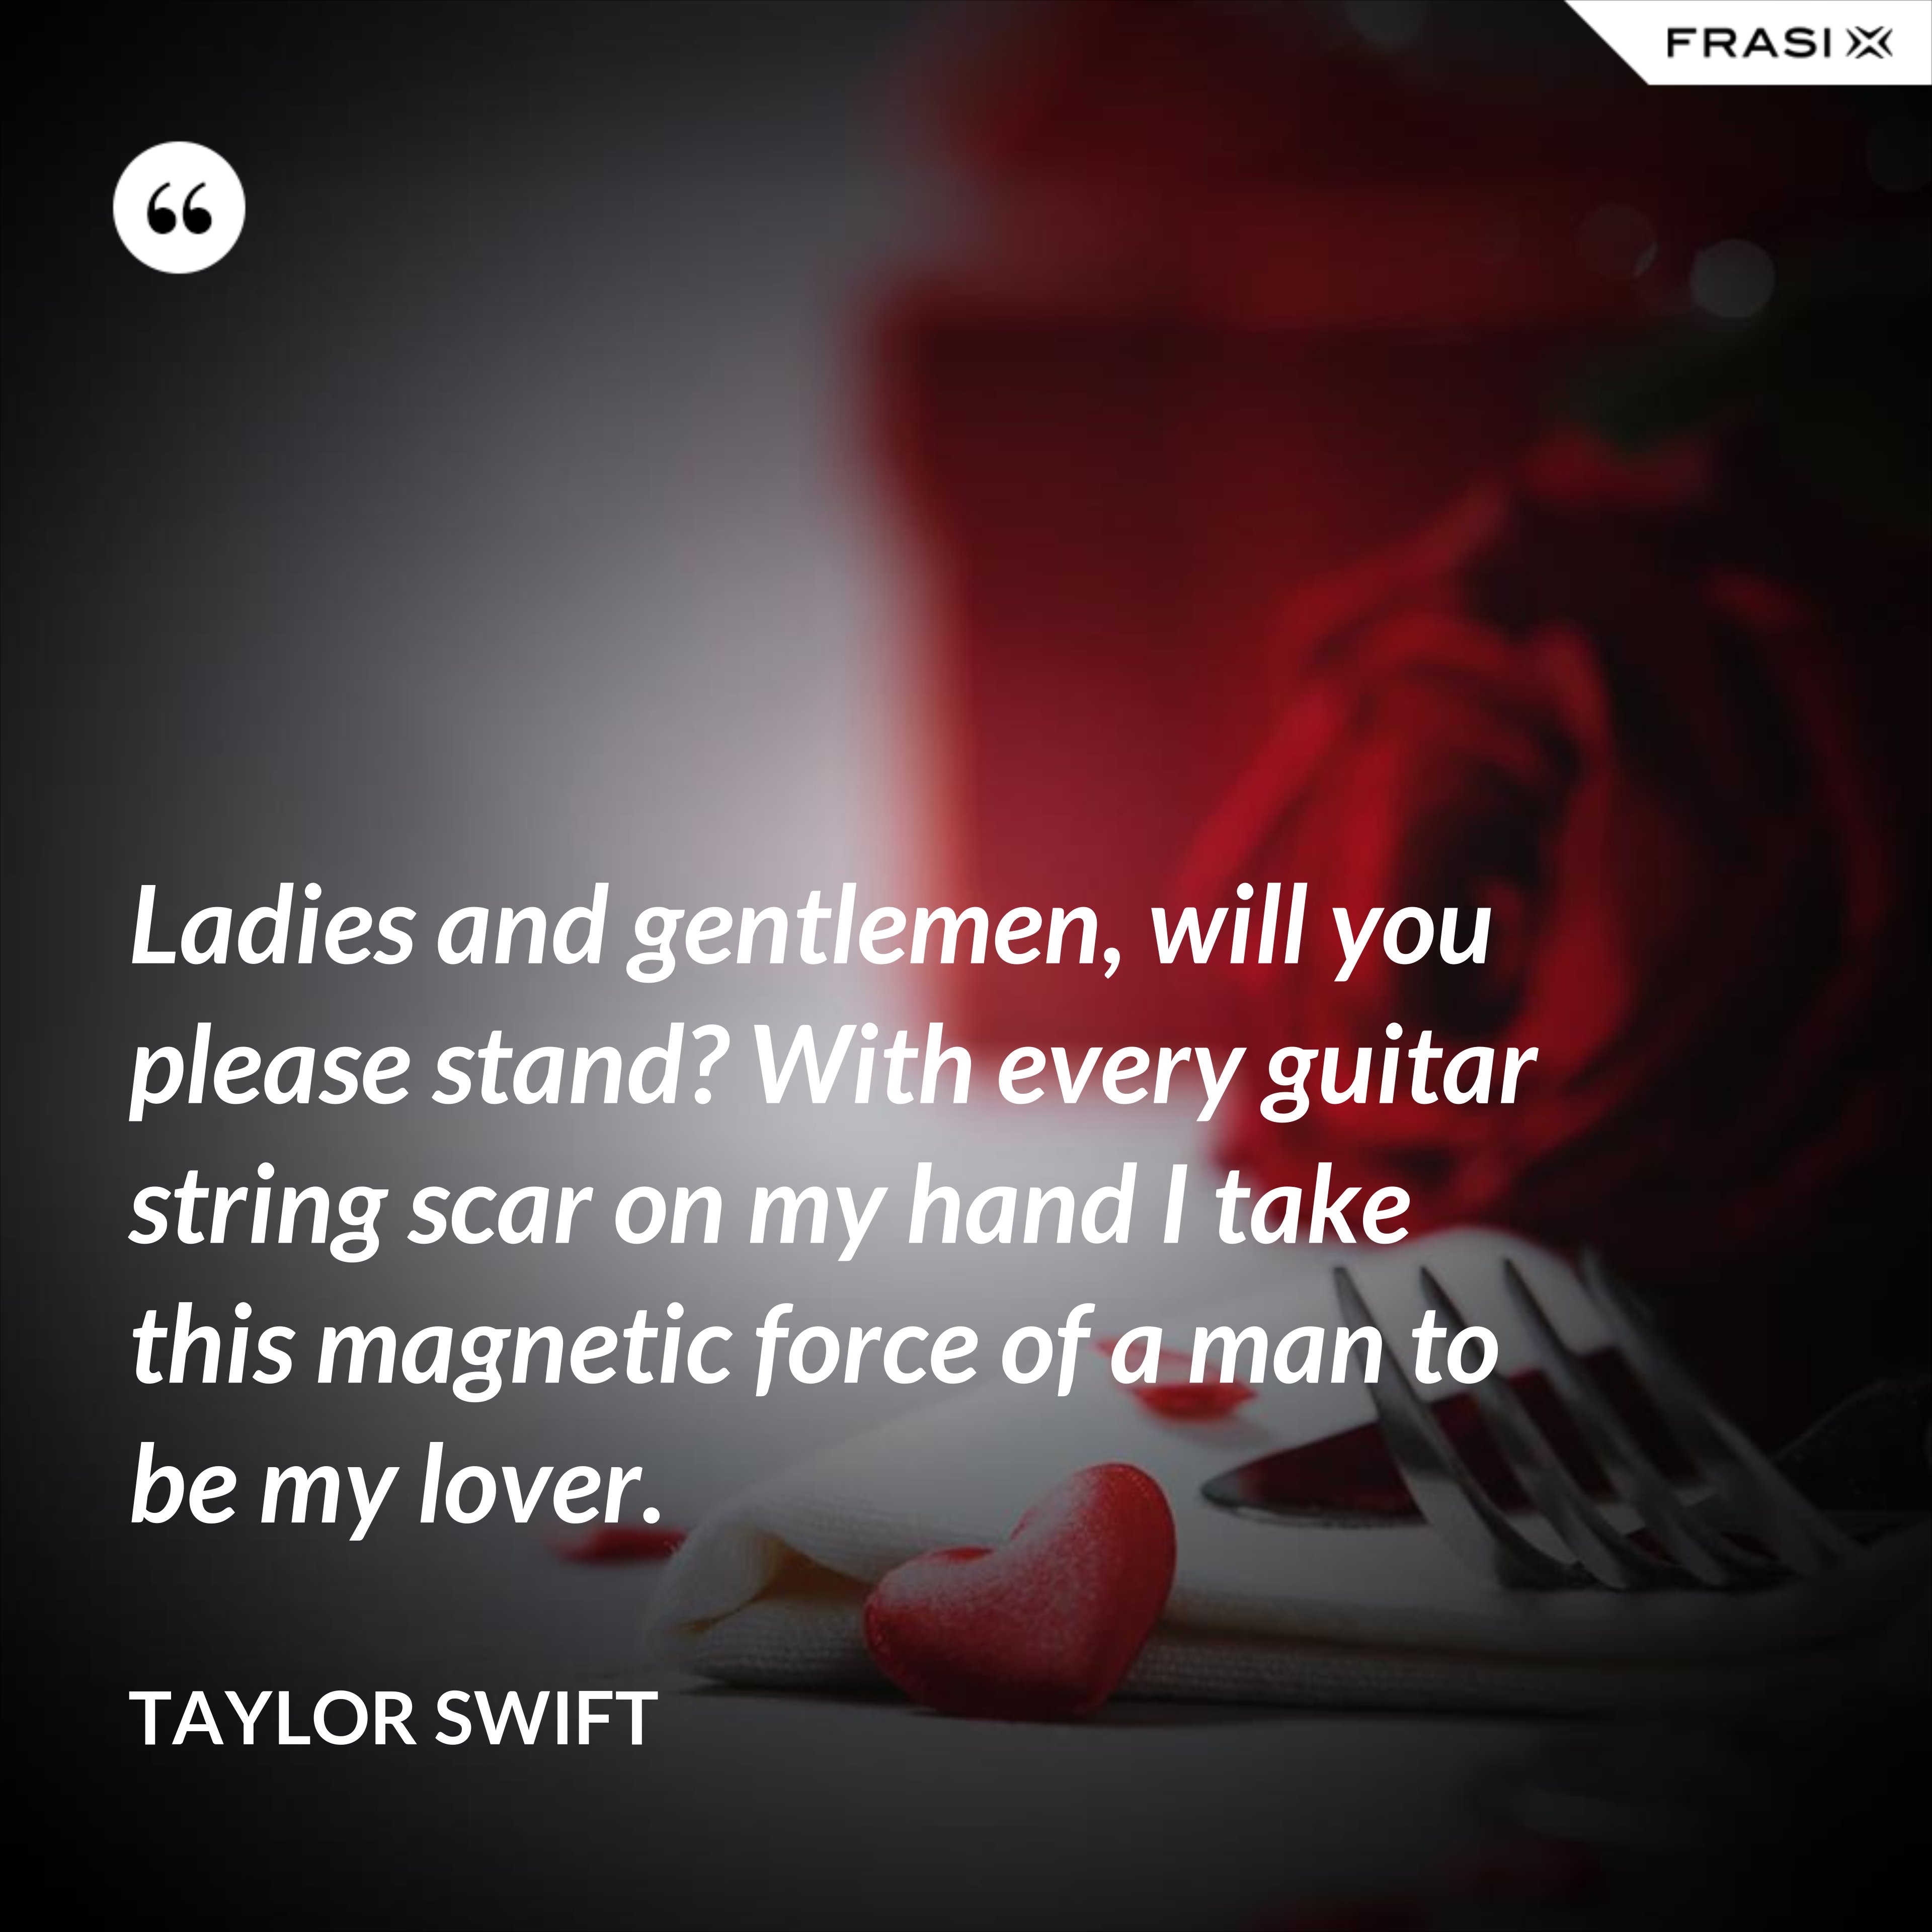 Ladies and gentlemen, will you please stand? With every guitar string scar on my hand I take this magnetic force of a man to be my lover. - Taylor Swift